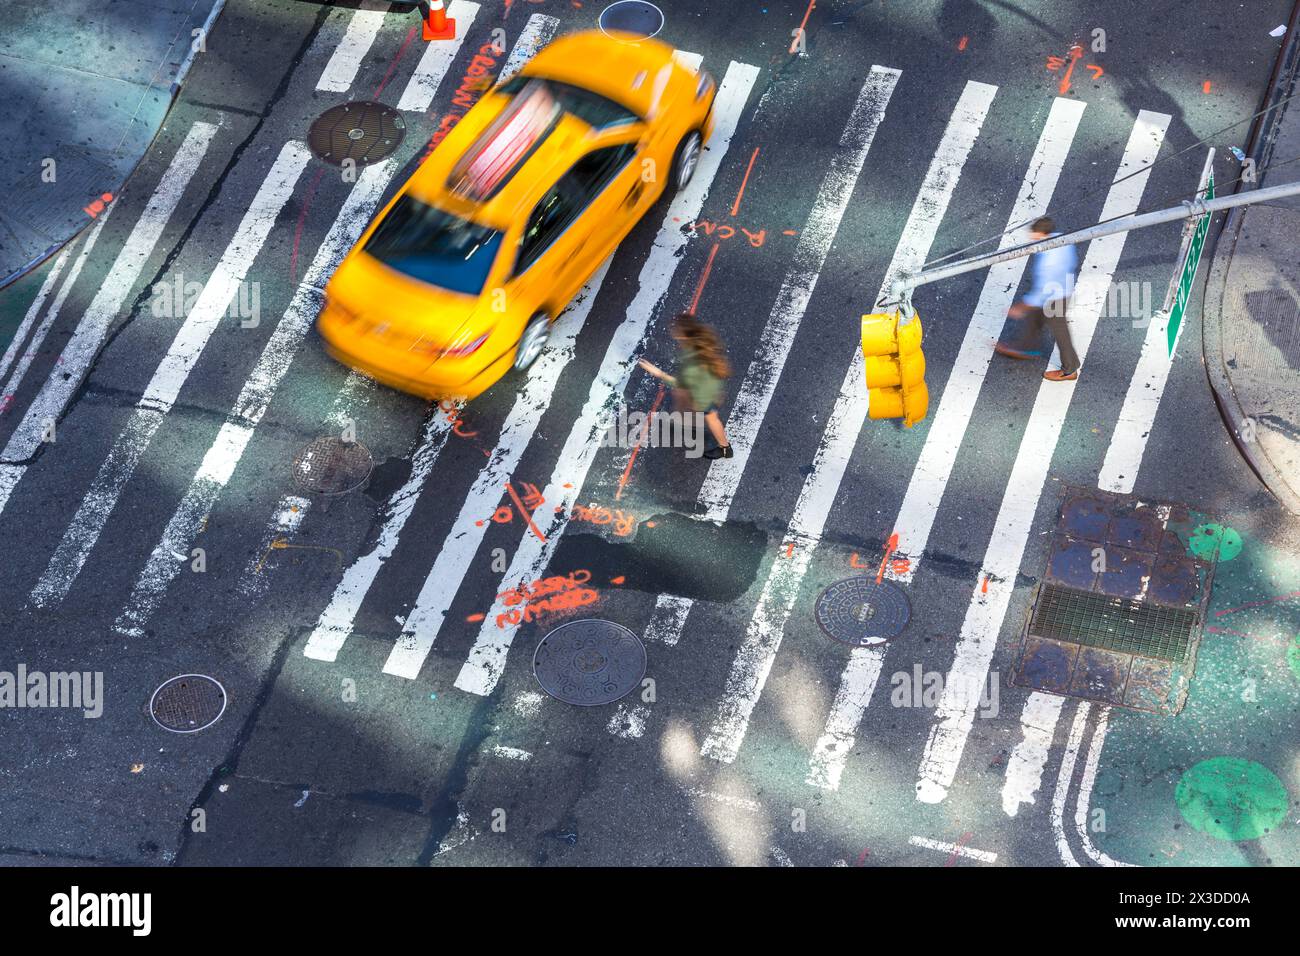 Aerial view of yellow taxi & pedestrian crossing, Central Manhattan, New York, USA Stock Photo